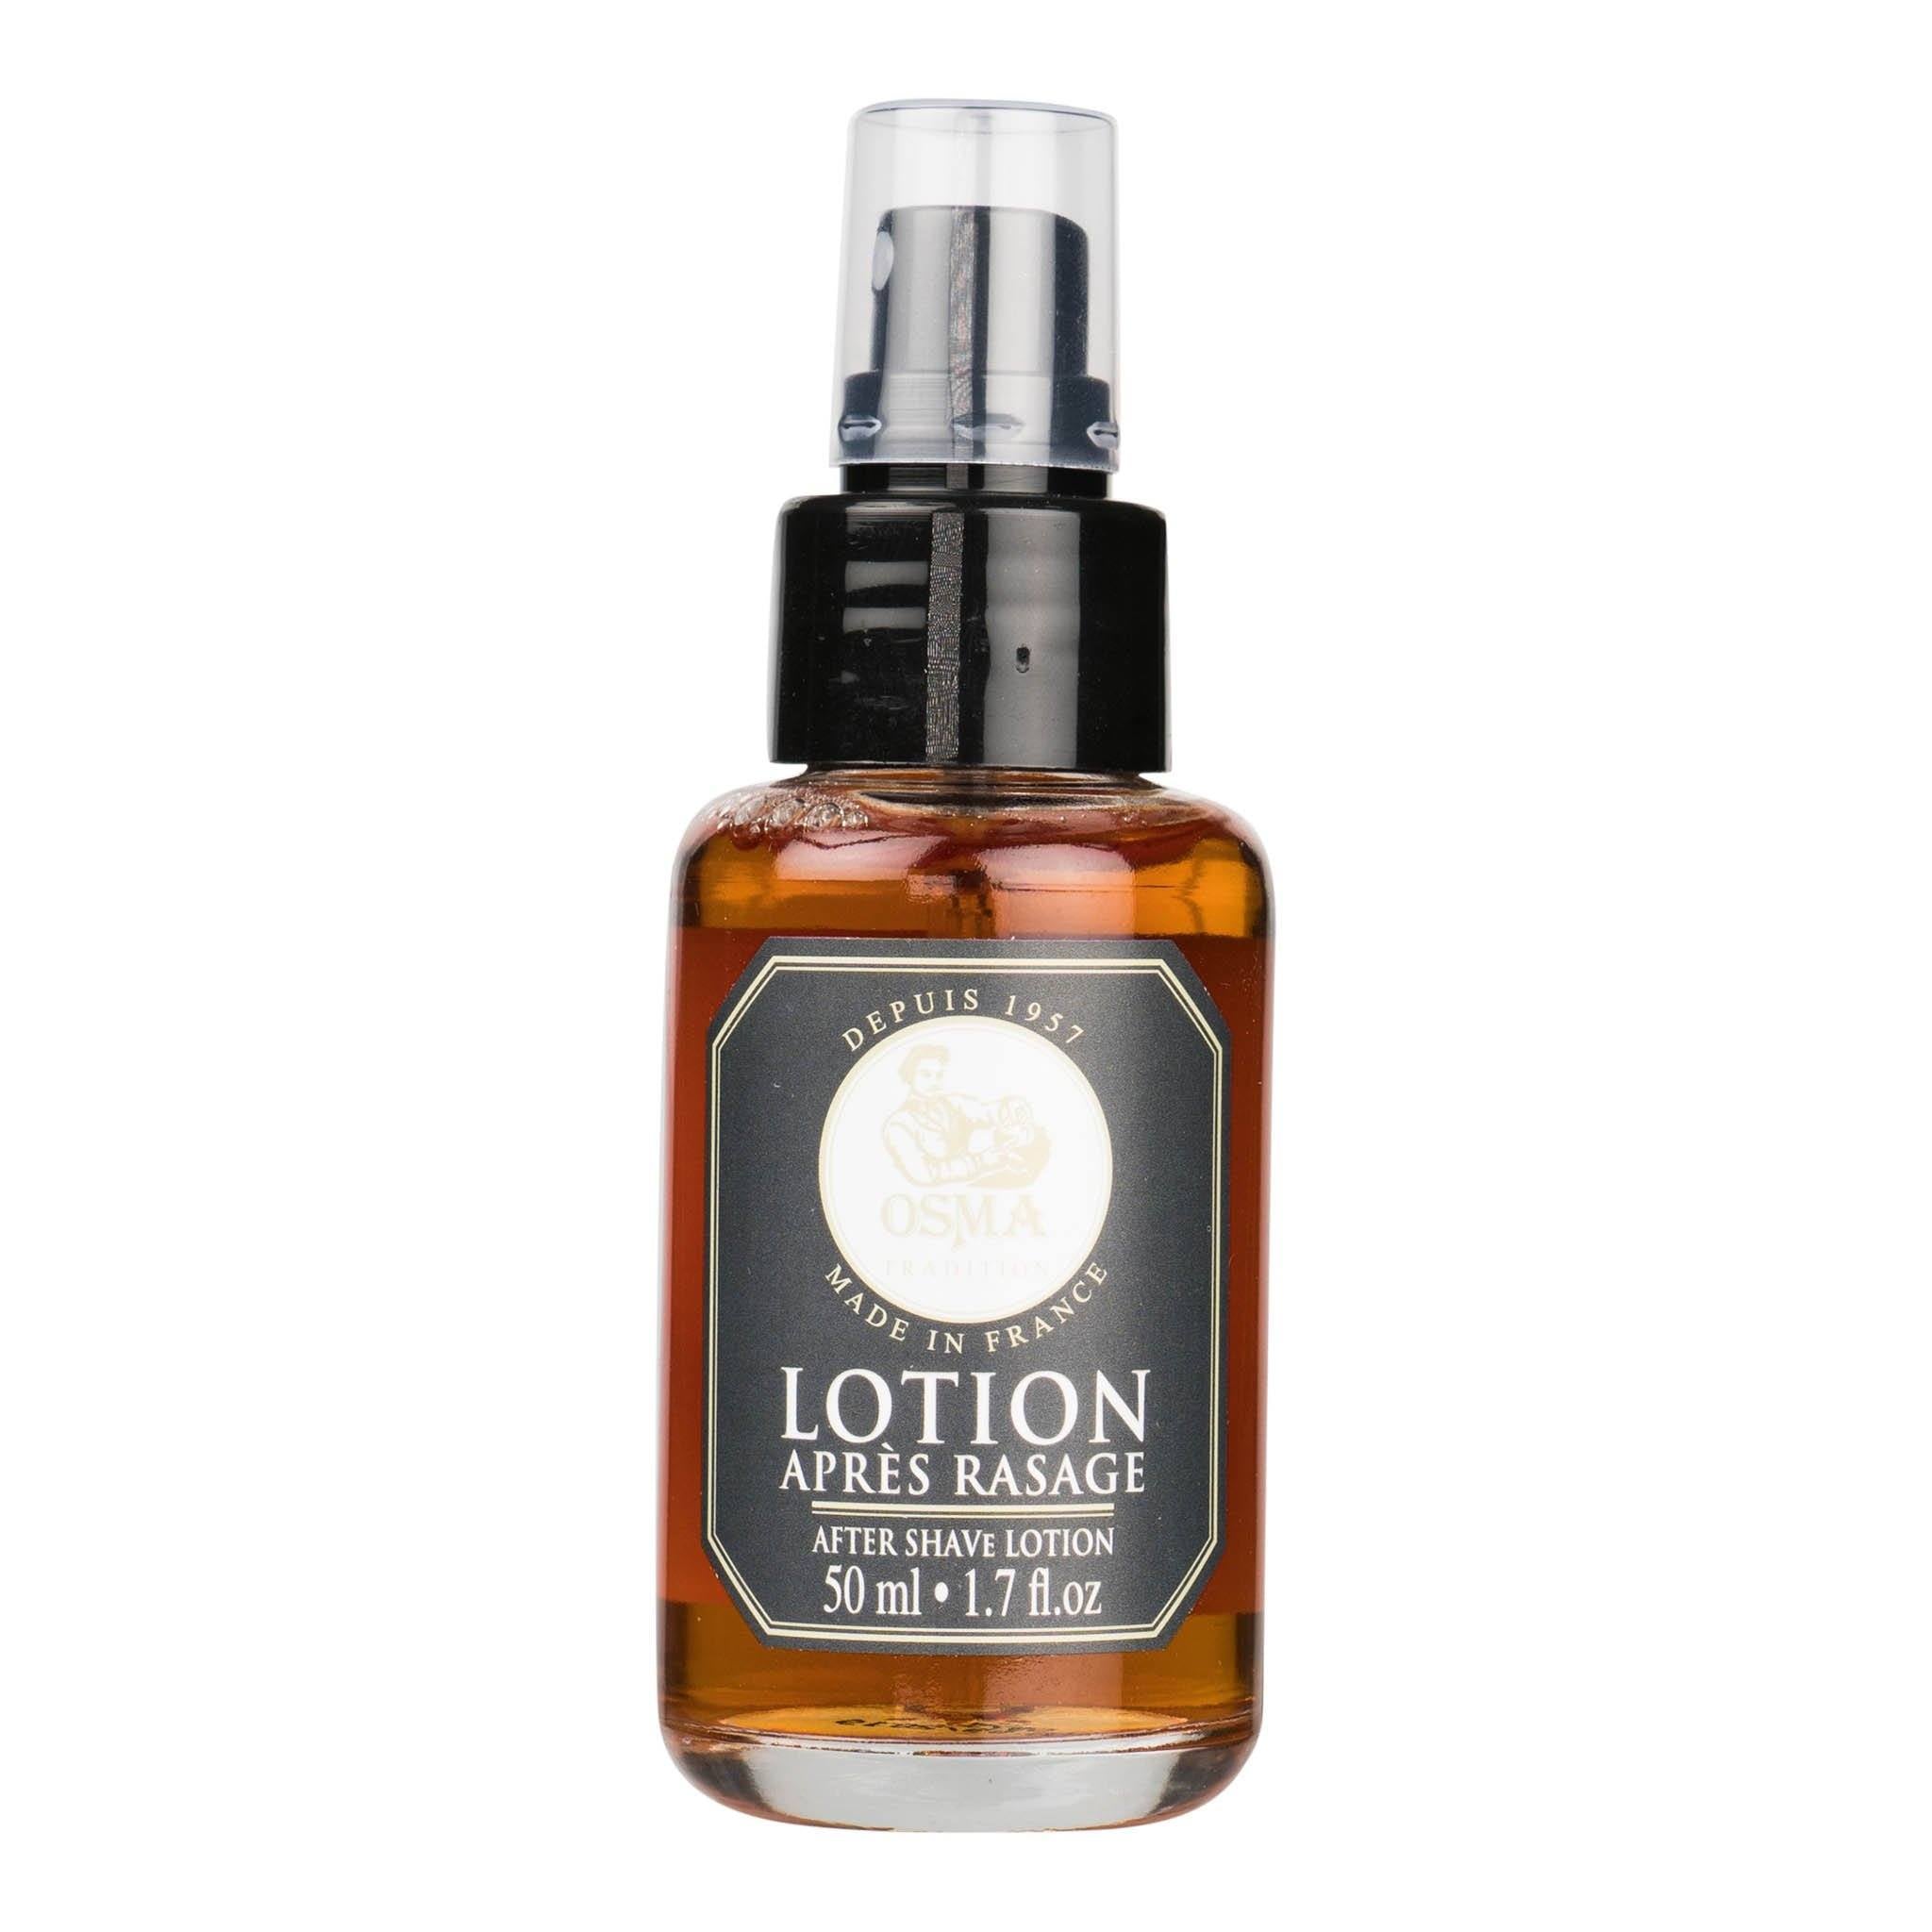 Osma Tradition After Shave Lotion etterbarberingsvann